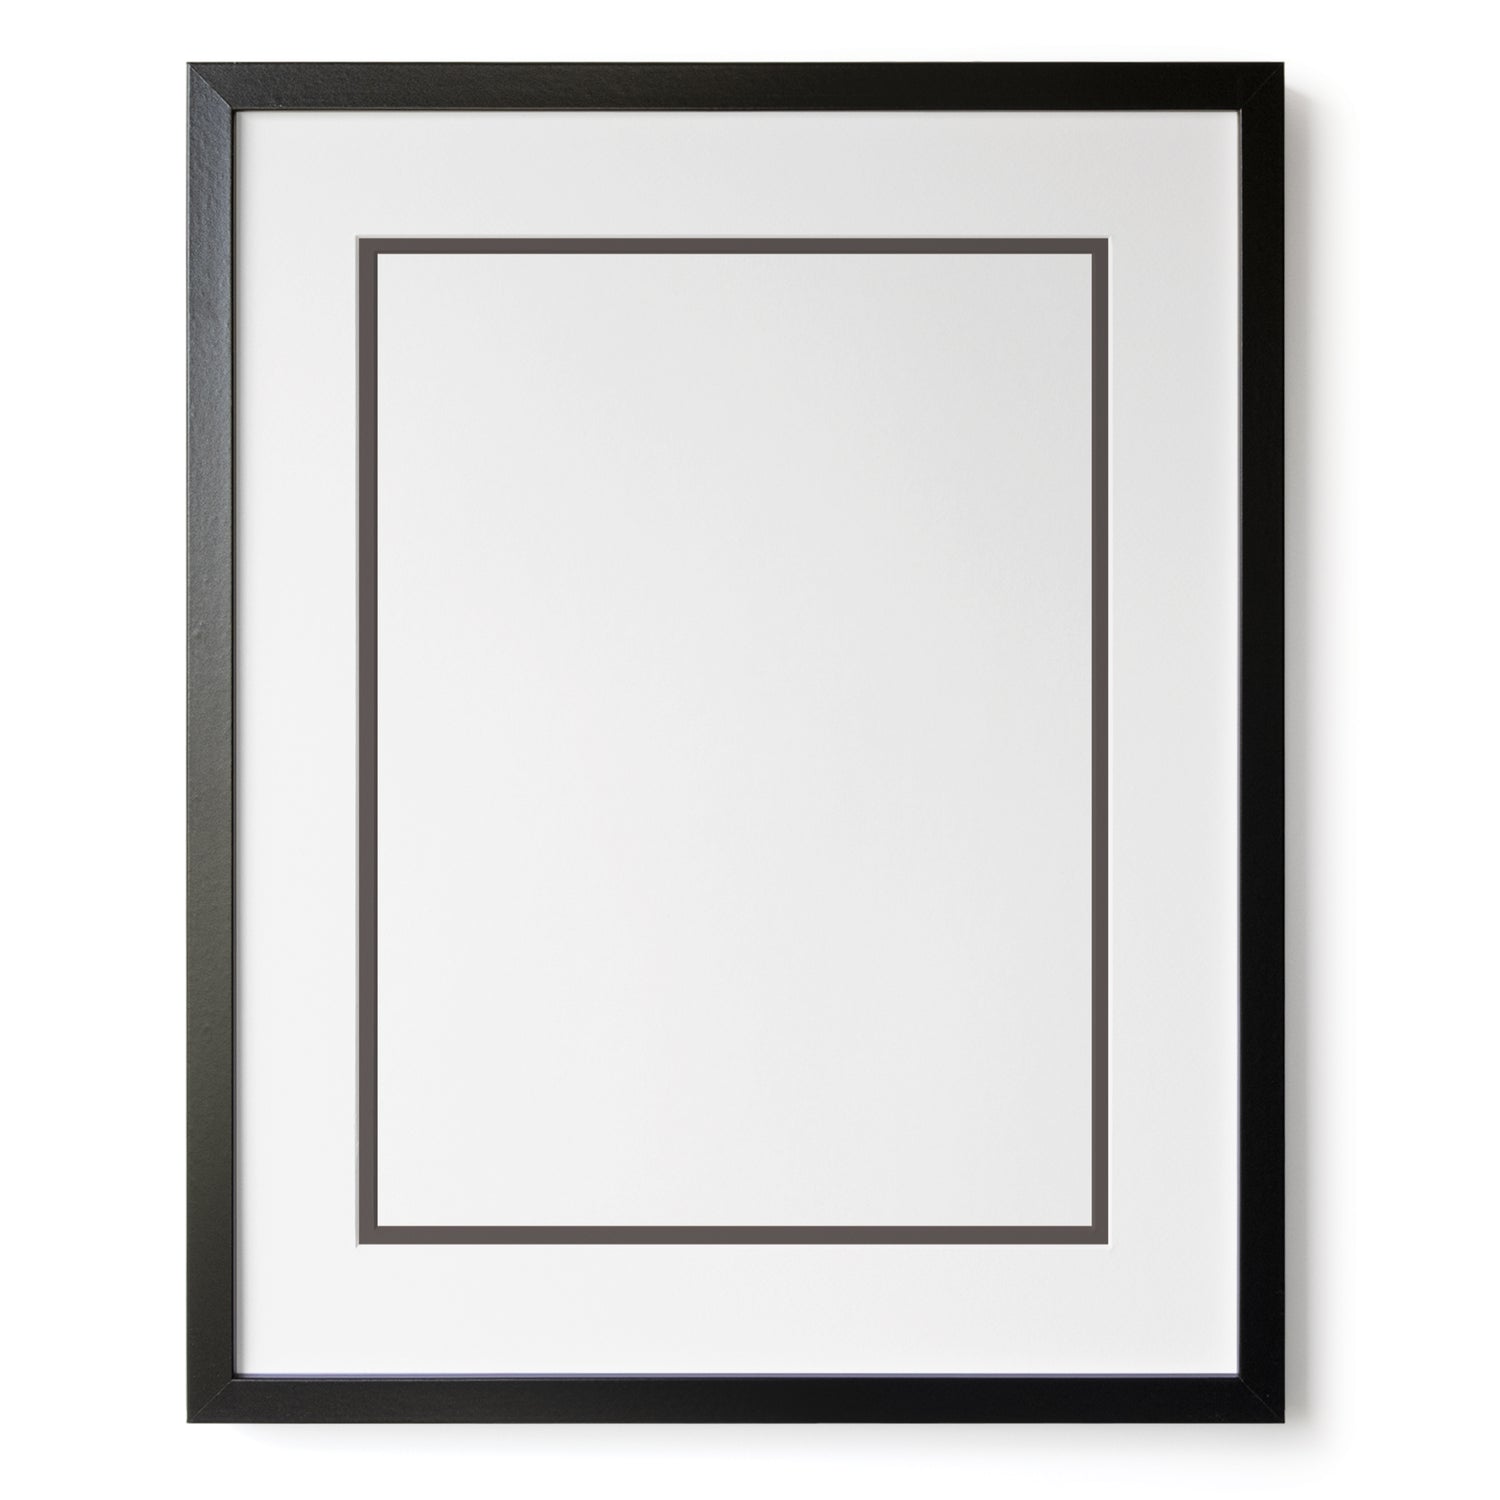 A thin black frame with a double mat